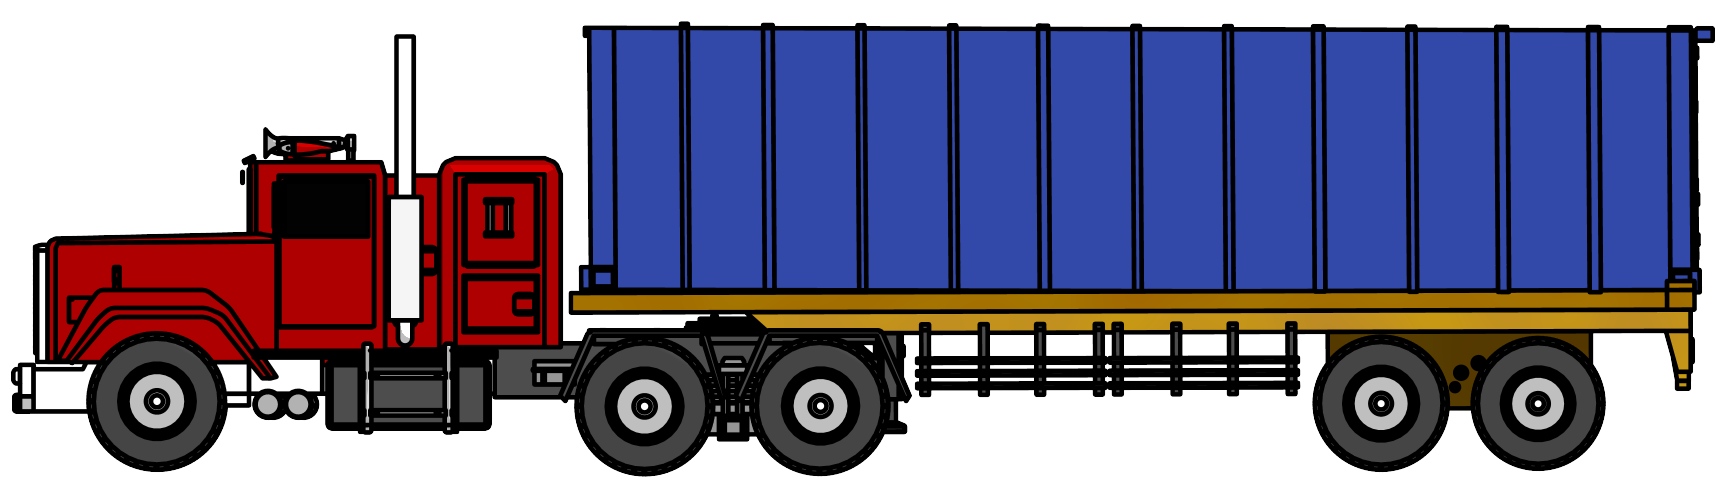 Industrial truck big png. Clipart duck side view